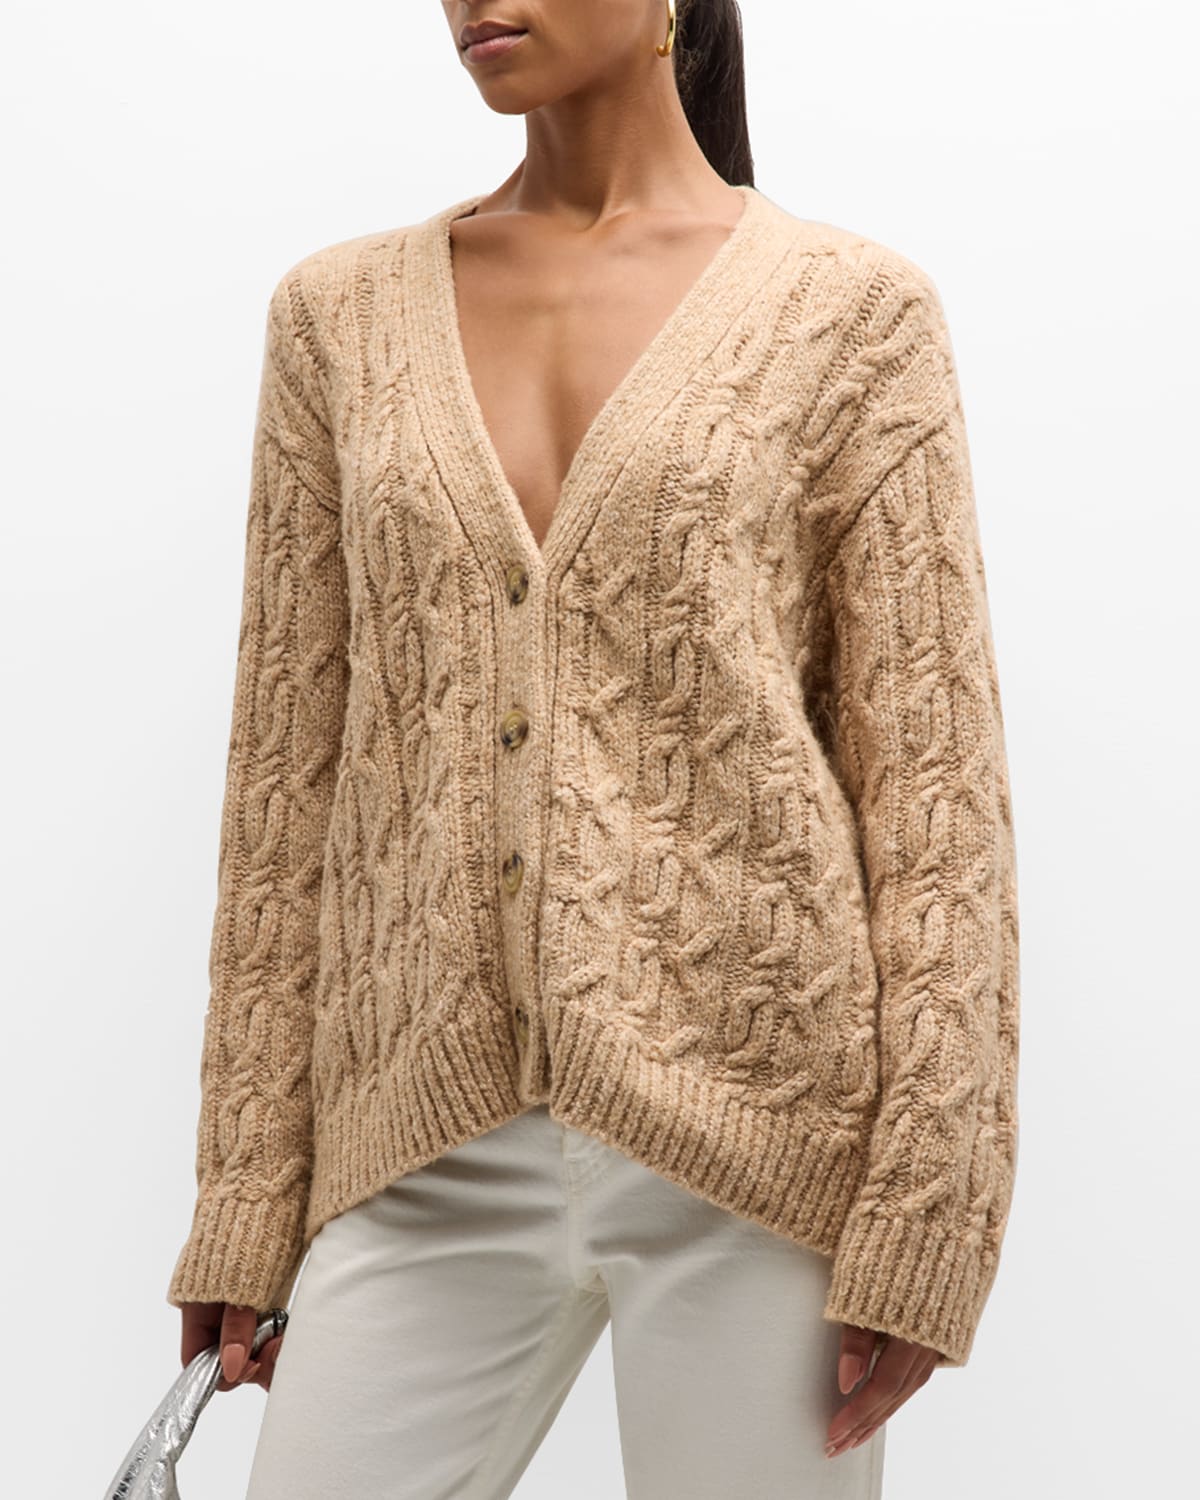 ATM ANTHONY THOMAS MELILLO MULTICOLOR BOUCLE CABLE-KNIT CARDIGAN